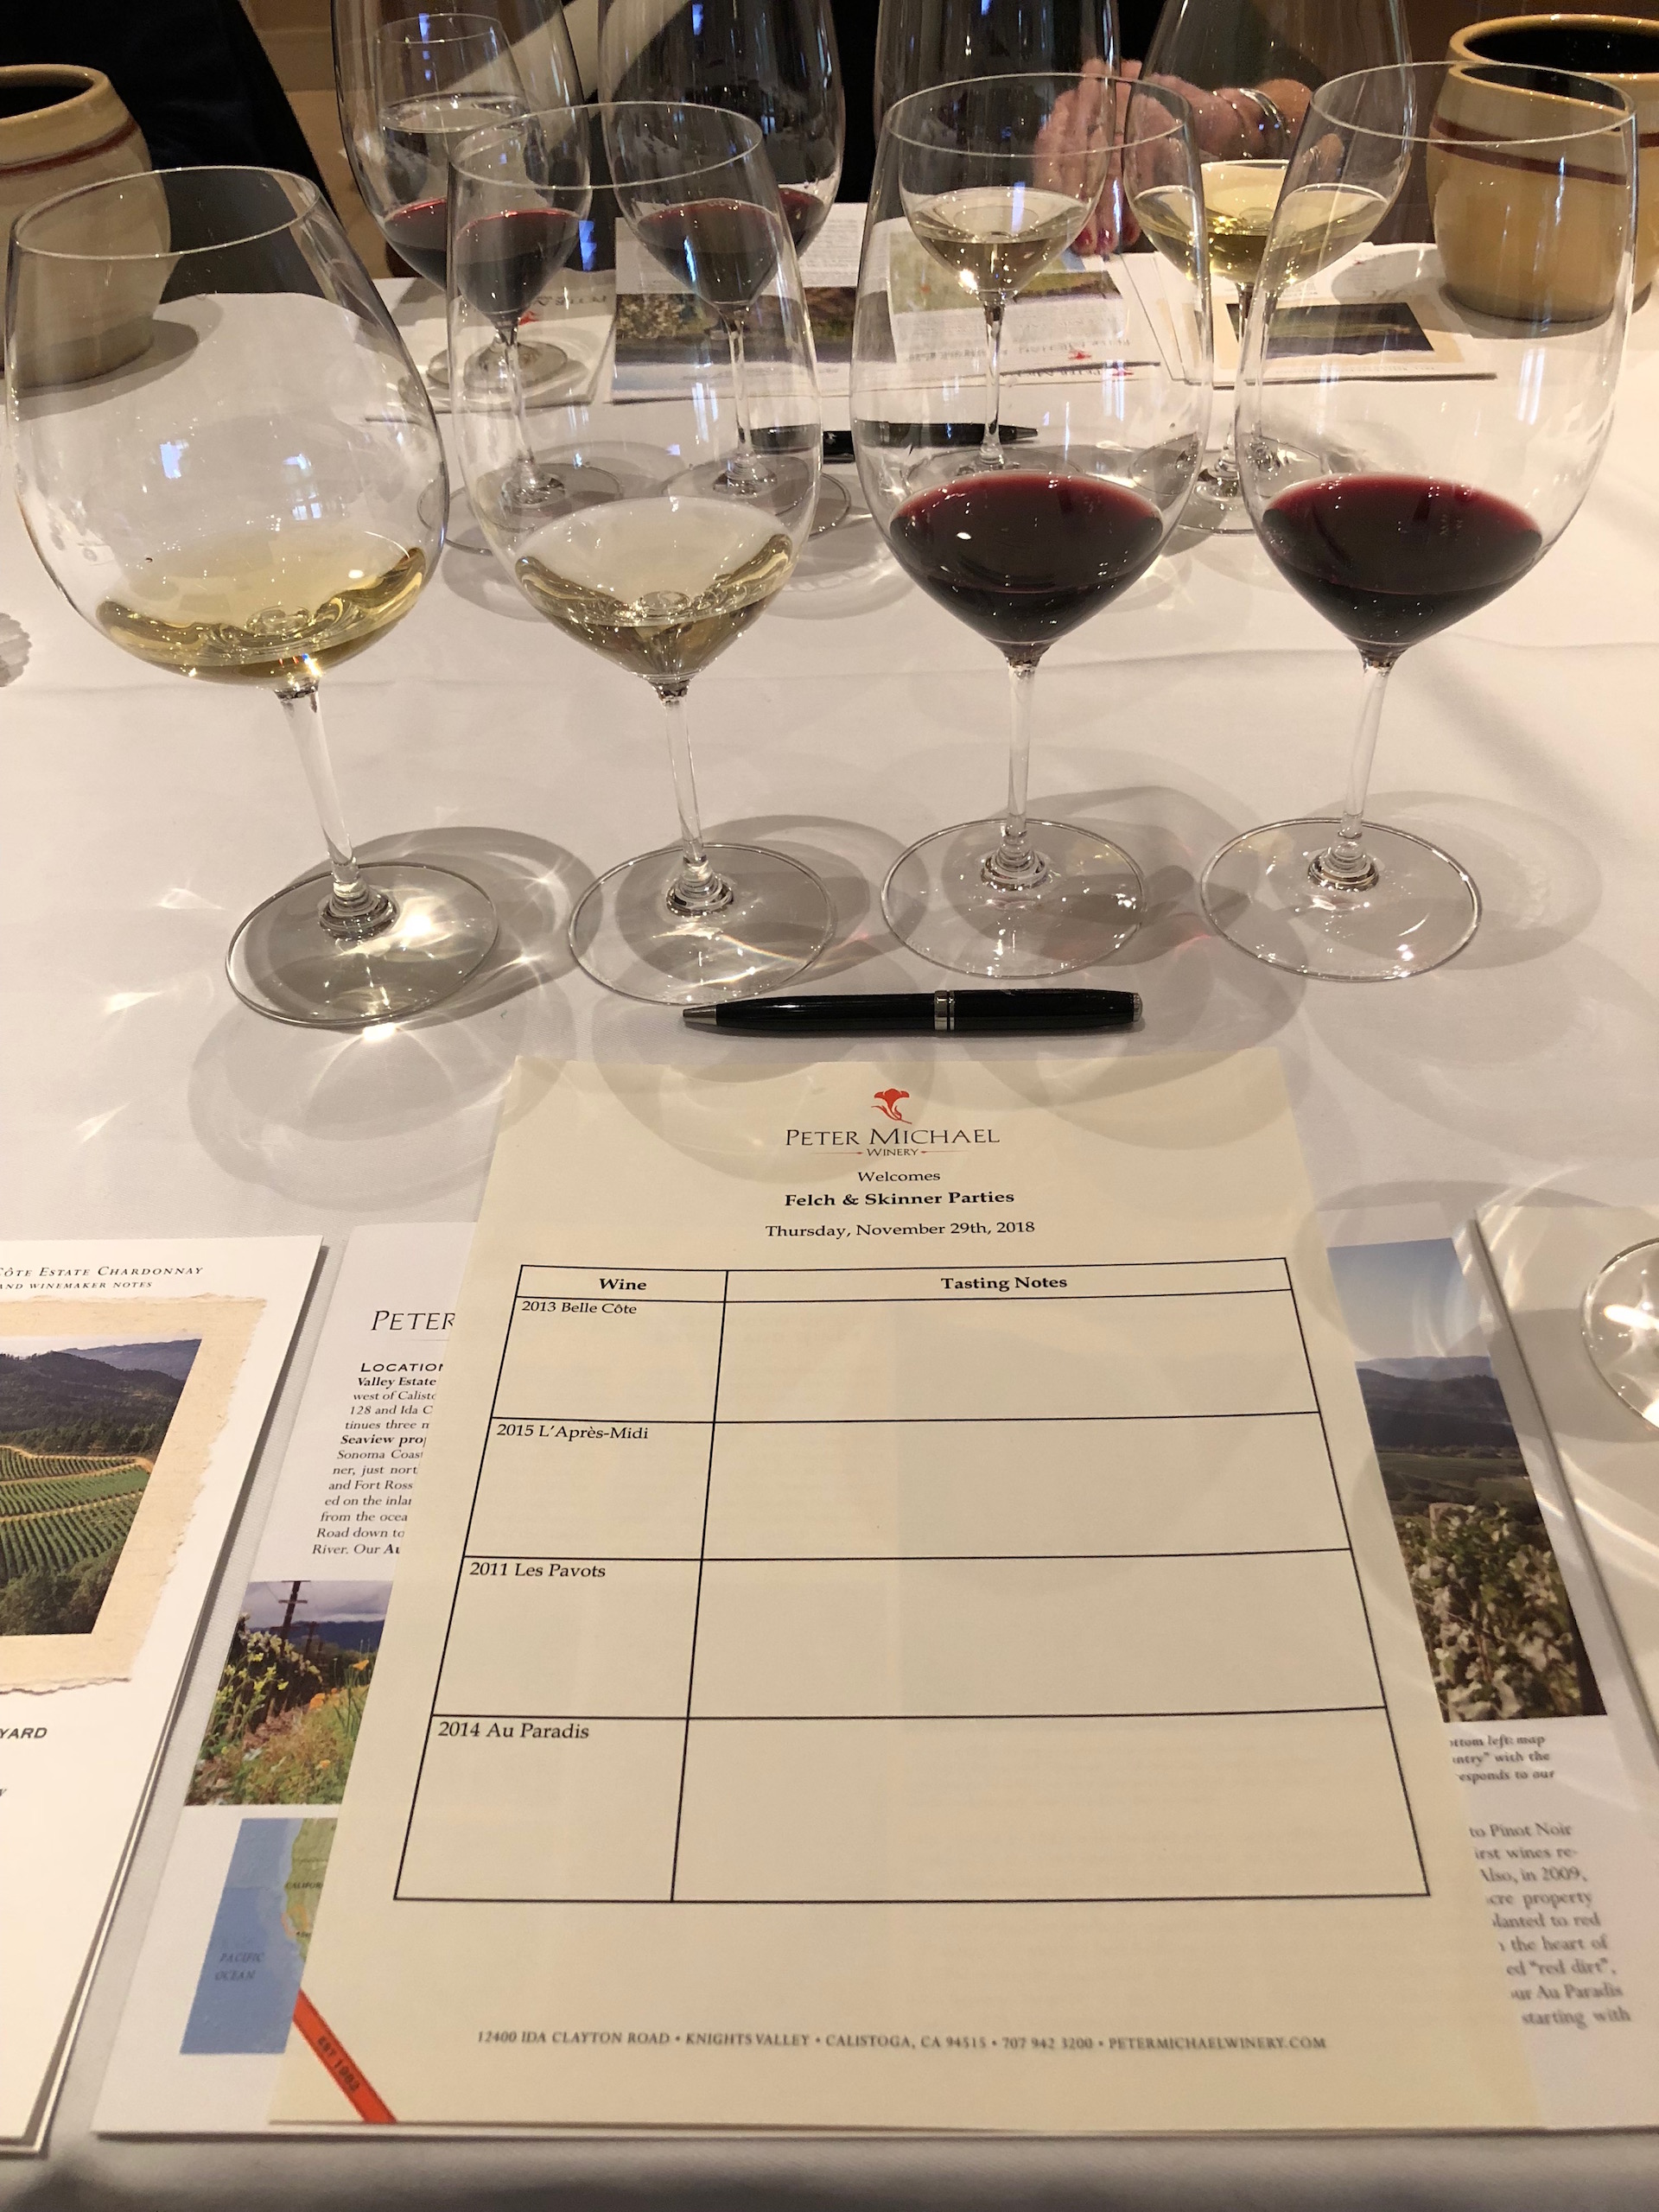 Time for some tasting...and tasting notes...of the Peter Michael wines